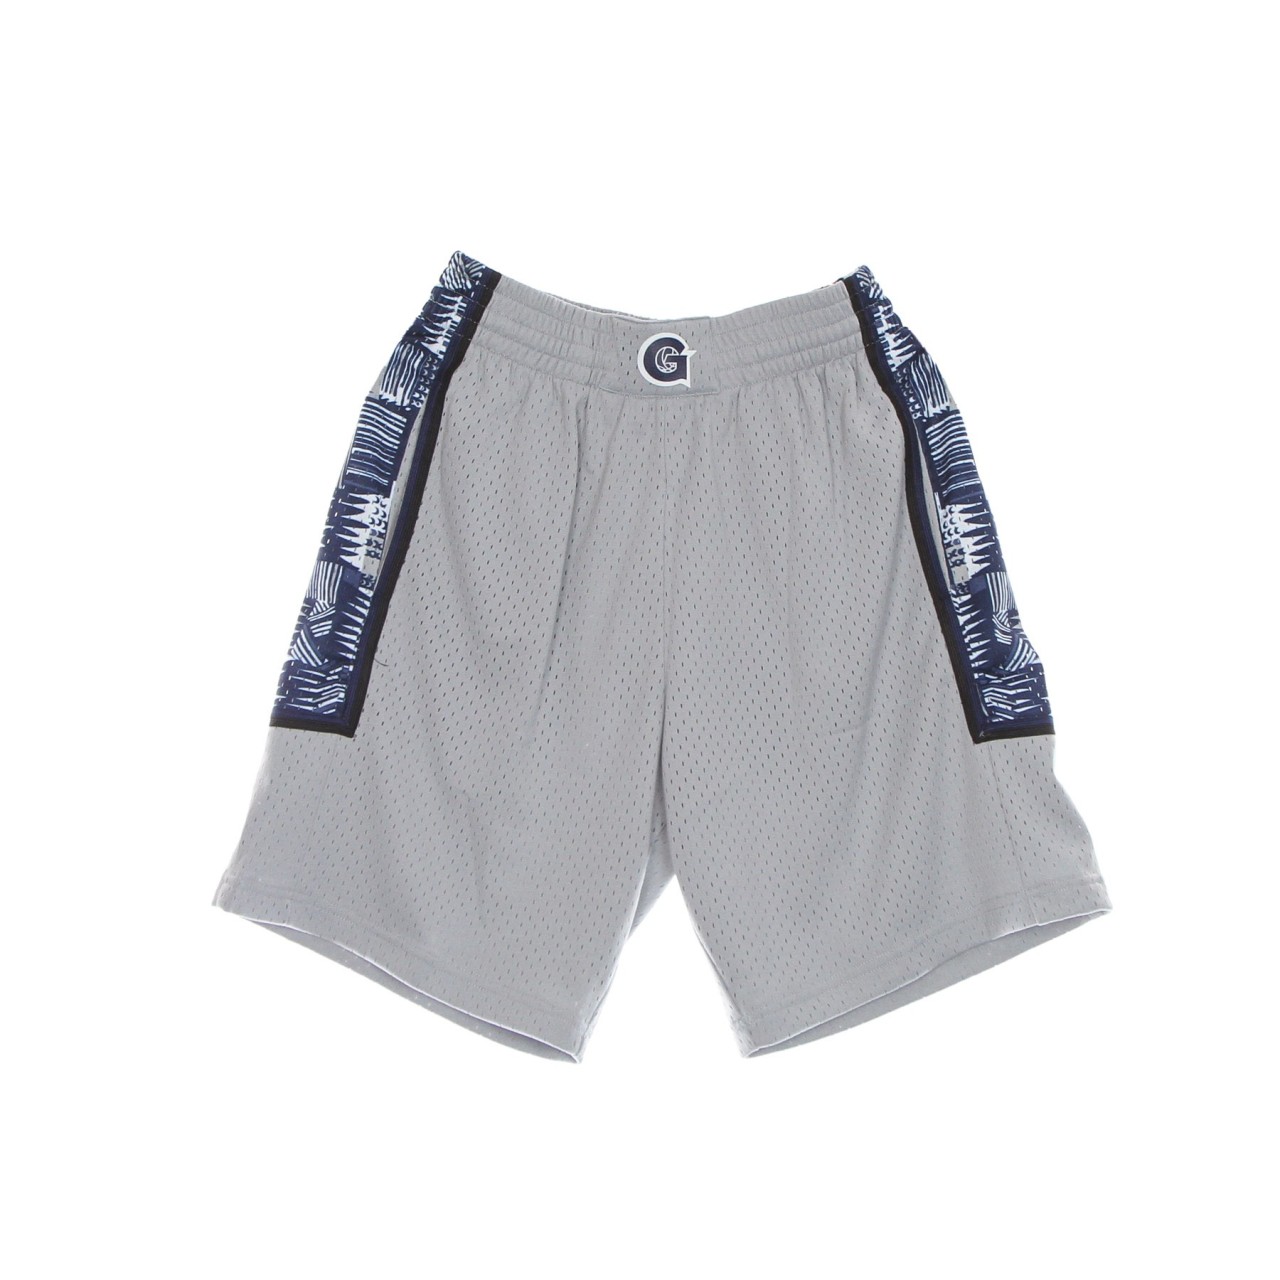 MITCHELL & NESS NCAA SWINGMAN SHORTS GEOHOY SMSH1172-GTW95PPPCHRM